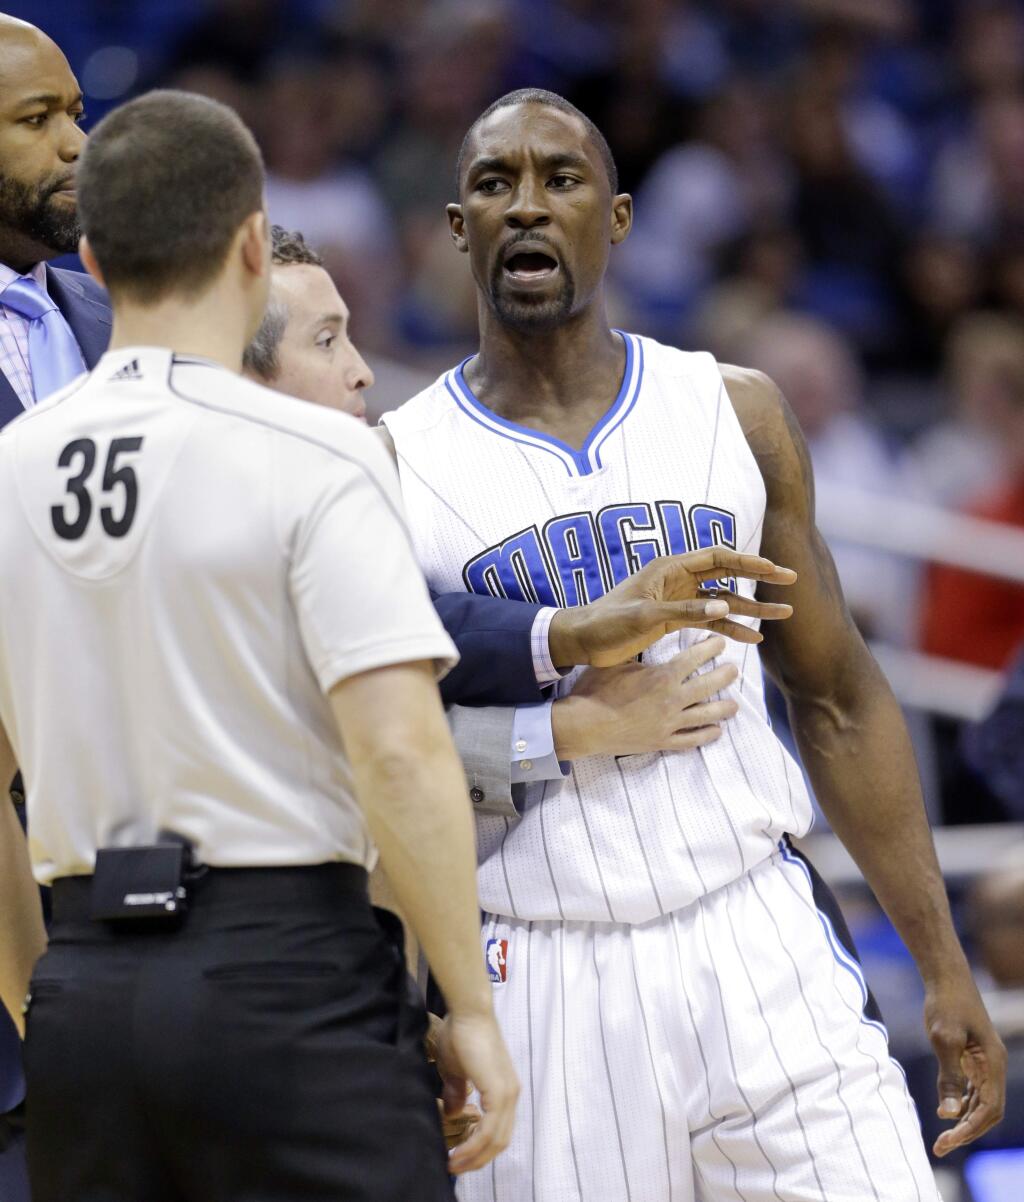 FILE - In this Jan. 31, 2015, file photo, Orlando Magic's Ben Gordon, right, talks with referee Kane Fitzgerald (35) before he was ejected in the fourth quarter of an NBA basketball game against the Dallas Mavericks, in Orlando, Fla. Former NBA player Ben Gordon has been arrested on suspicion of robbery in Los Angeles after police said he punched an apartment manager and pulled a knife. Gordon, 34, went to a building Saturday where he had rented two apartments and demanded his security deposit from the manager, police spokesman Tony Im said Tuesday, Nov. 28, 2017. When the manager said he didn't have access to the deposit money, Gordon 'punched him in the face,' Im said. (AP Photo/John Raoux, File)